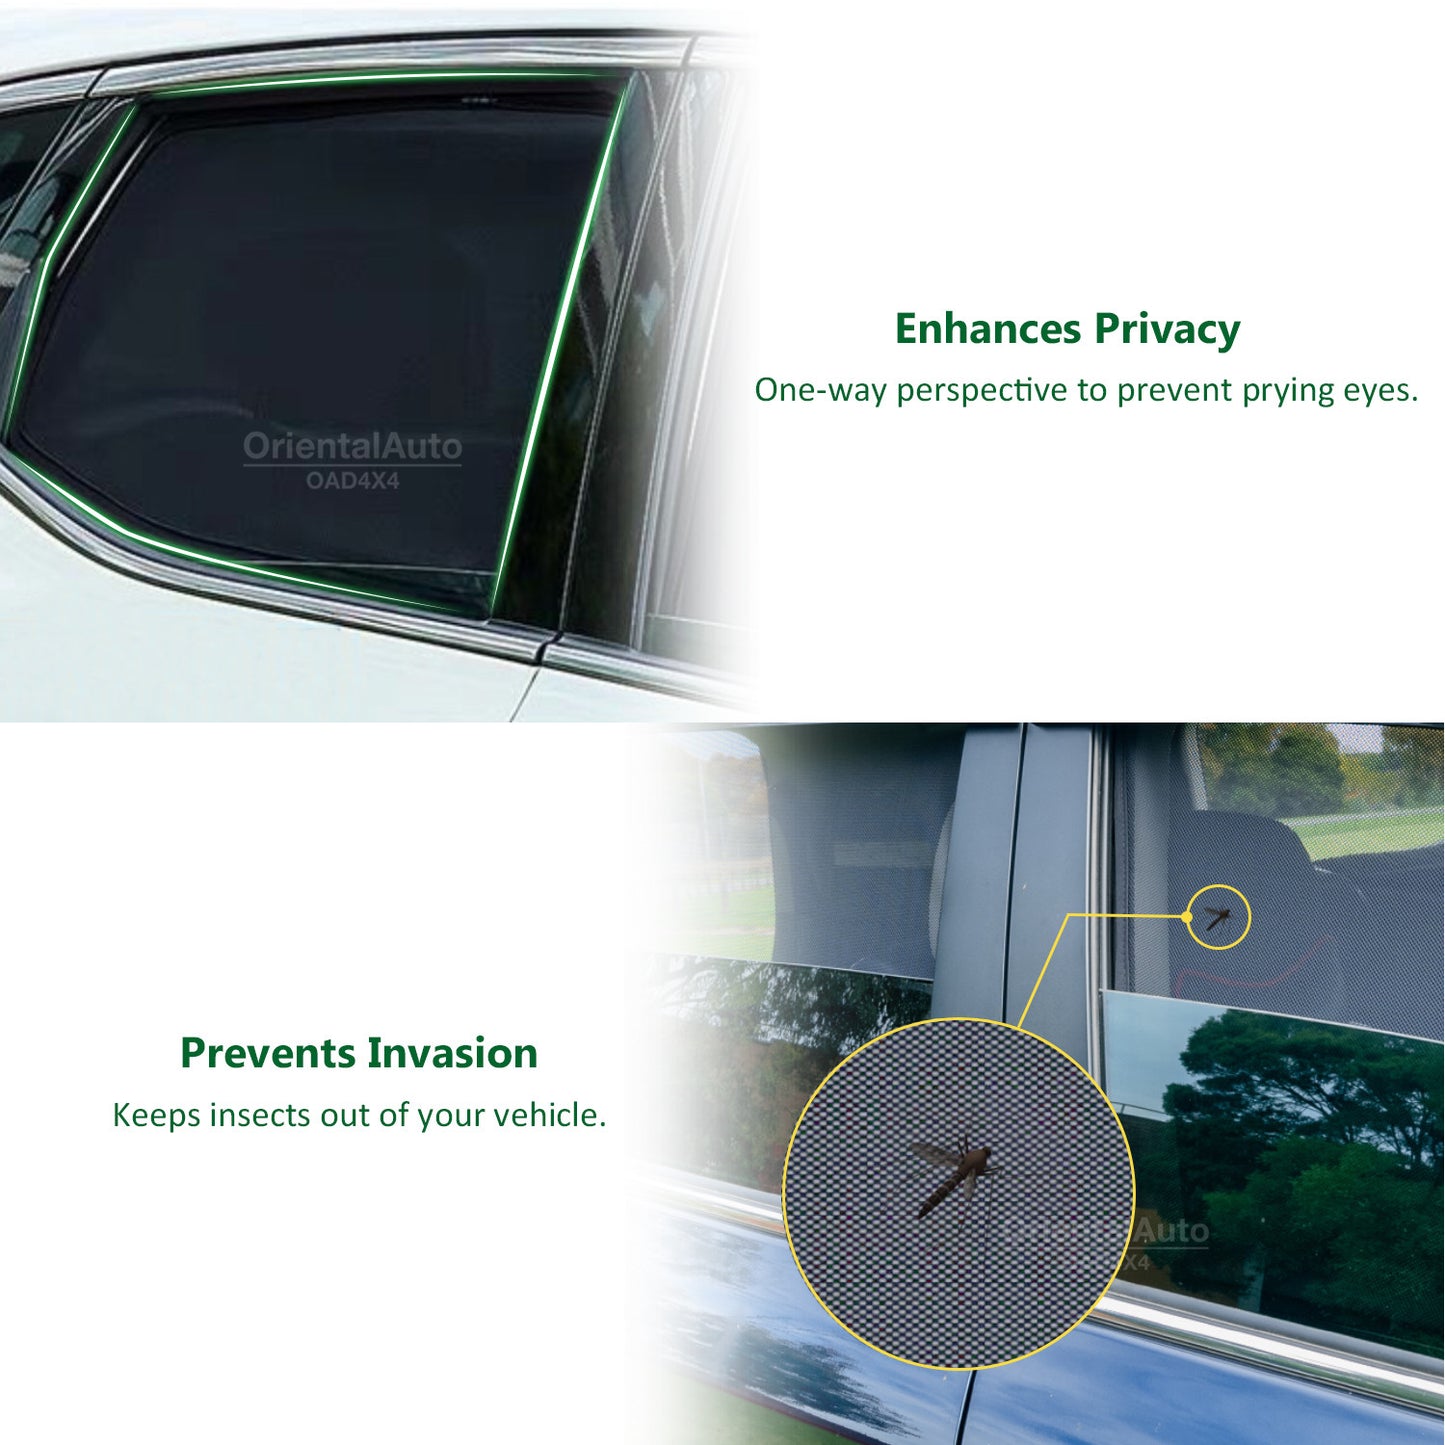 4PCS Magnetic Sun Shade for Volkswagen Tiguan 2008-2016 Window Sun Shades UV Protection Mesh Cover